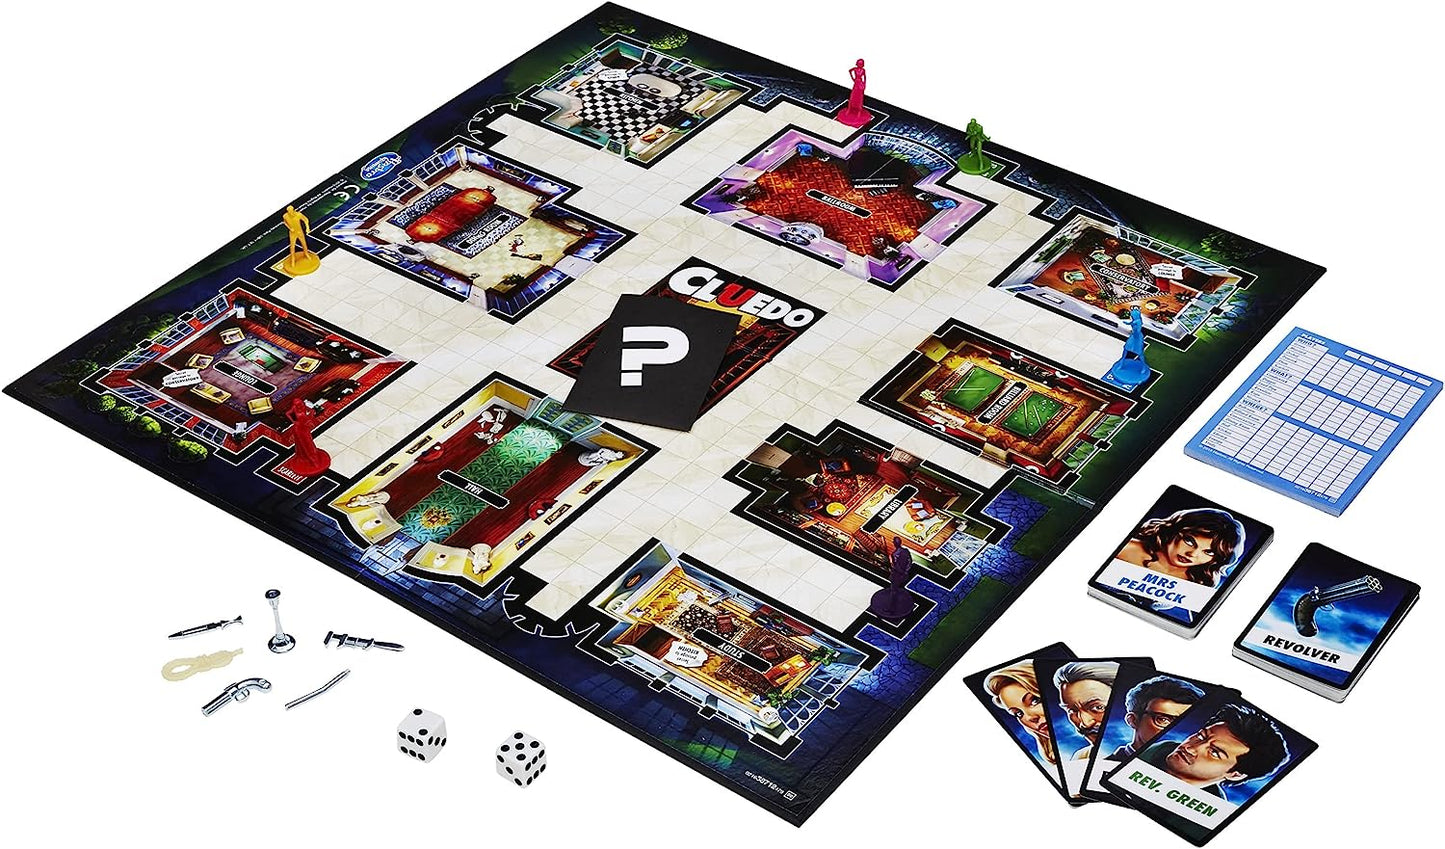 CLUE CLUEDO THE CLASSIC MYSTERY GAME